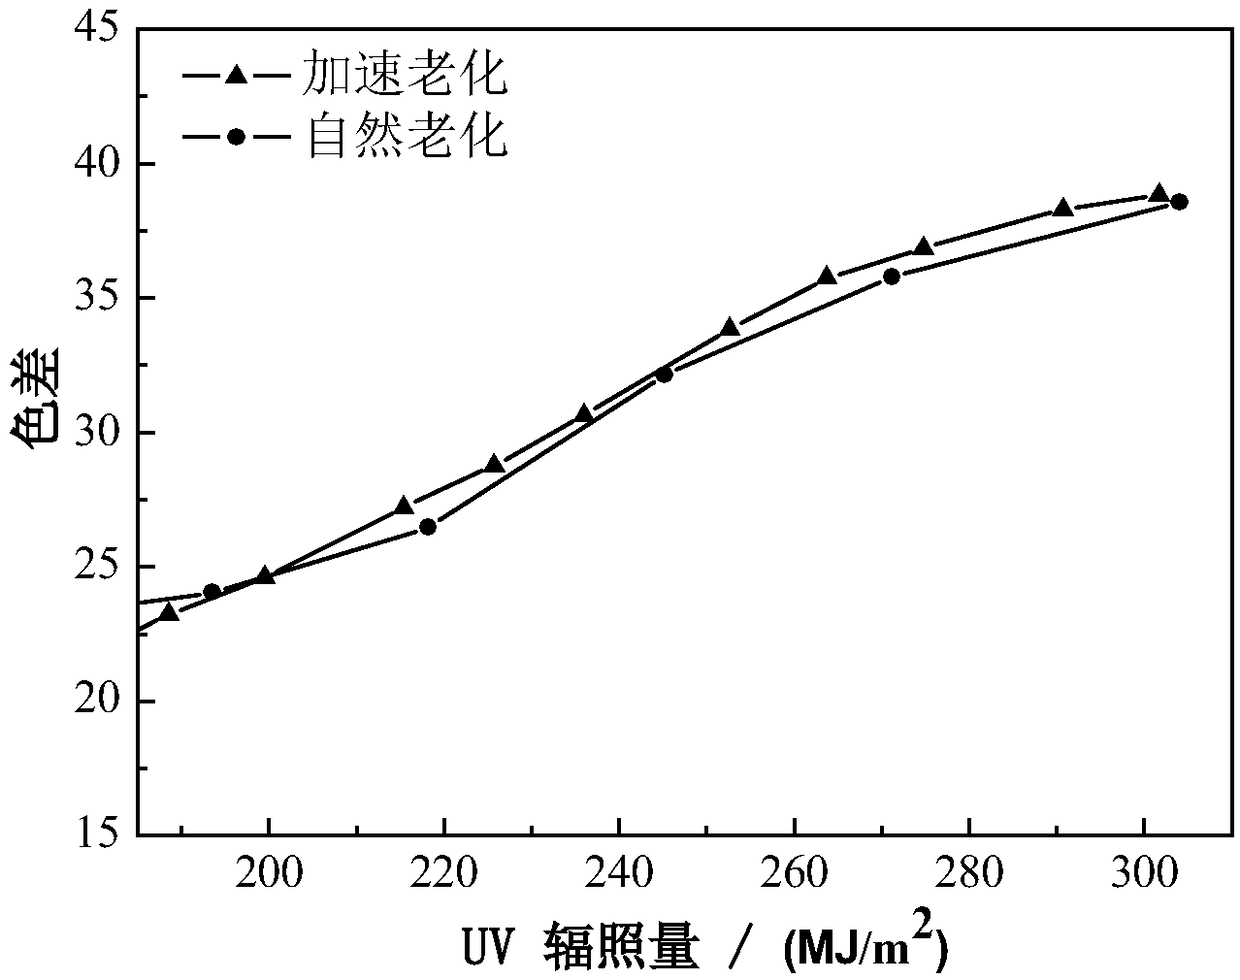 Accelerated aging test method for polymer material xenon lamp in environment simulating typical xerothermic climate of China